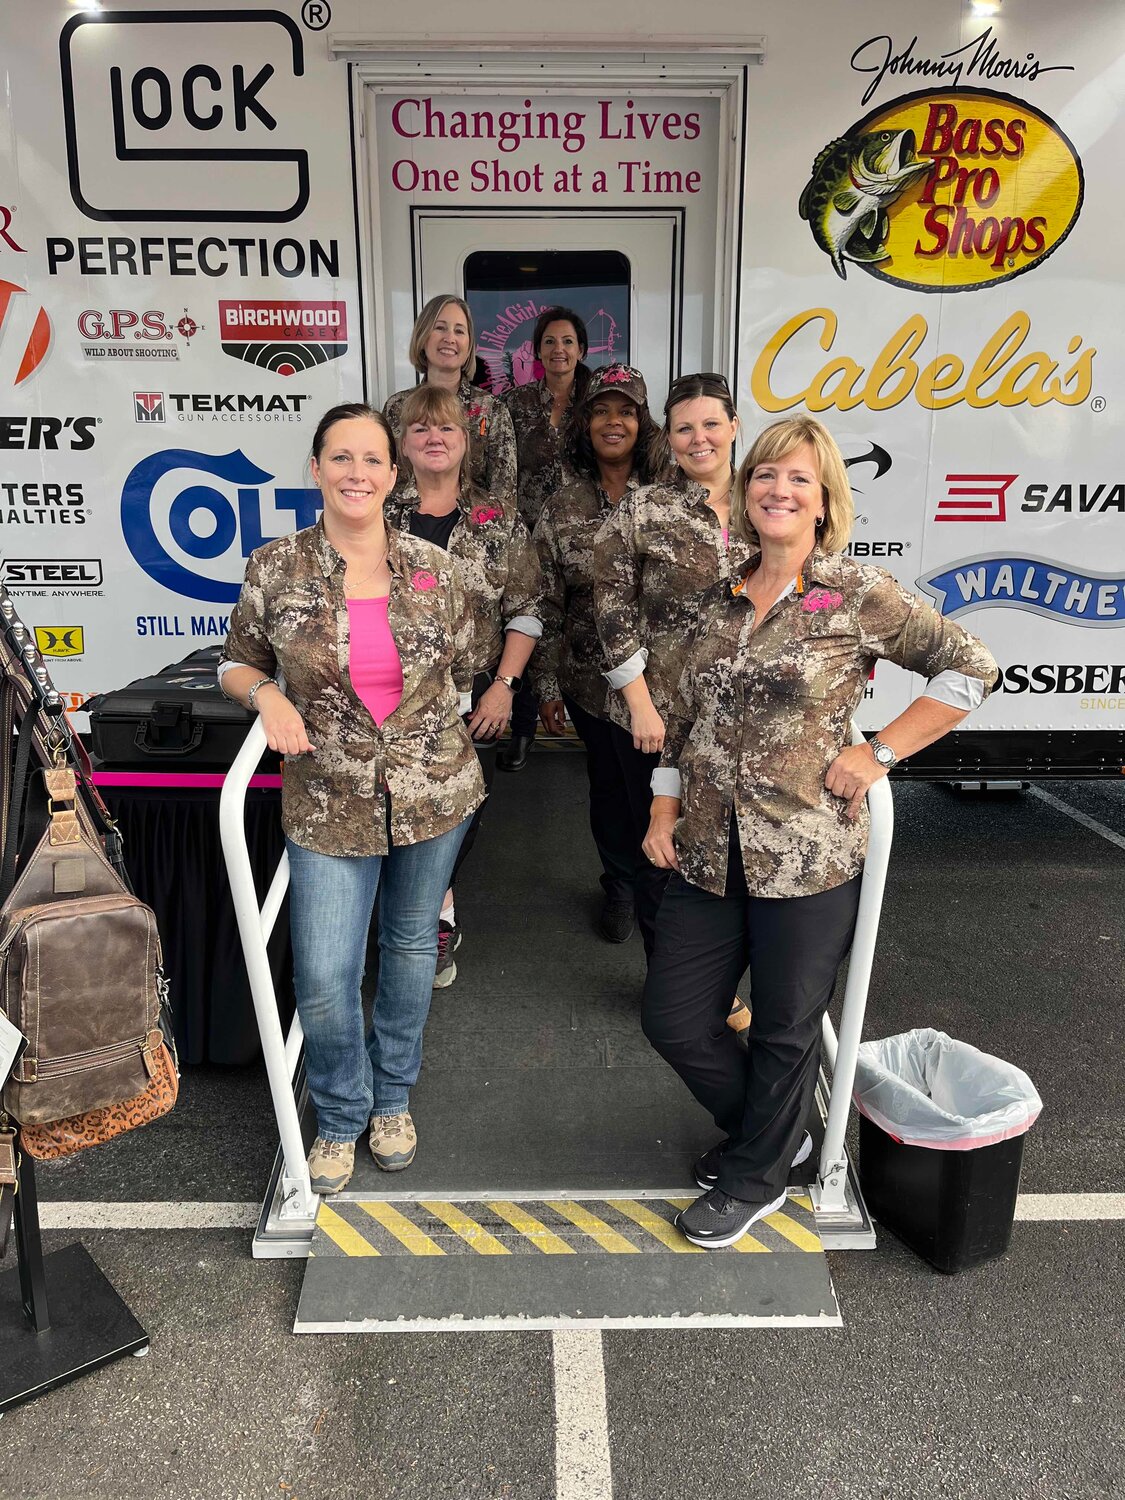 Shoot Like A Girl makes its next stop in its 15-year expansion tour Nov. 4-5 at Bass Pro Shops and Cabela's in Glendale near Westgate.